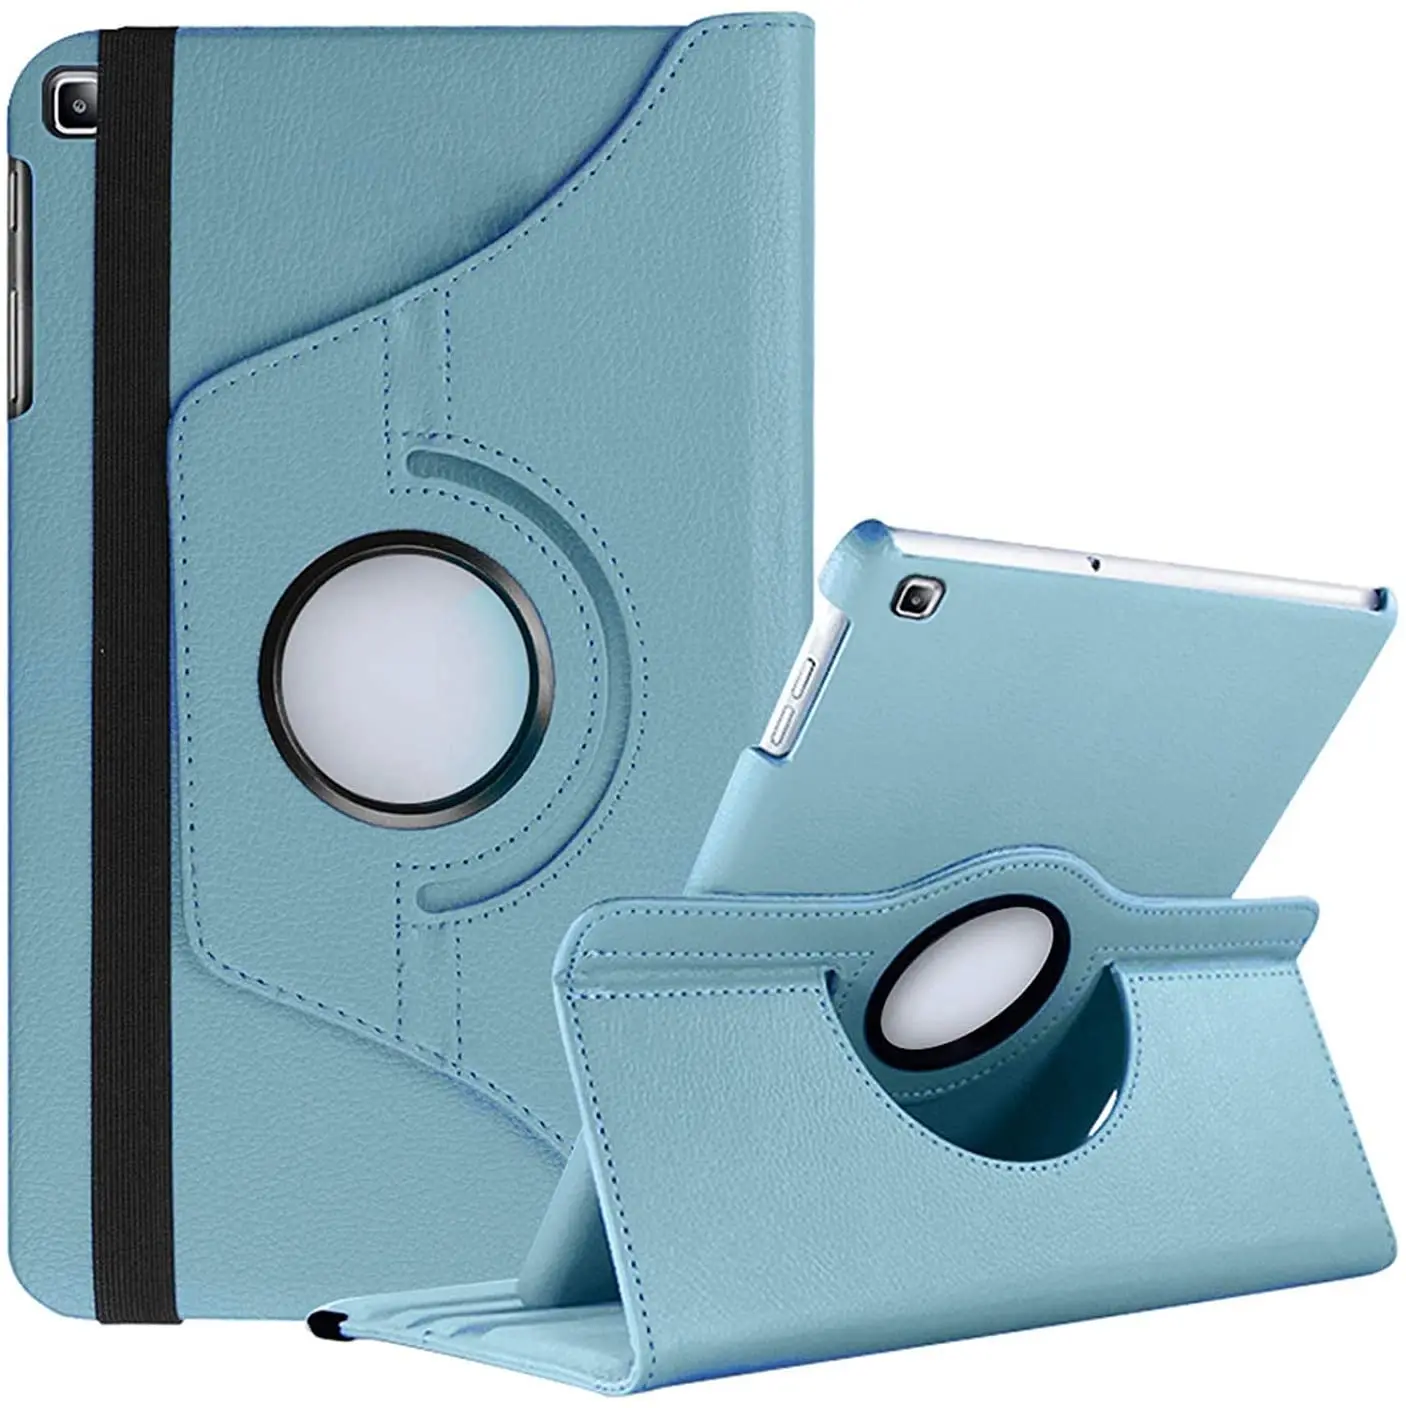 

For Samsung Galaxy Tab S5e 10.5"inch SM-T720 Case 2019 360 Degree Rotating PU Leather Smart Stand Case Protective Cover SM-T725